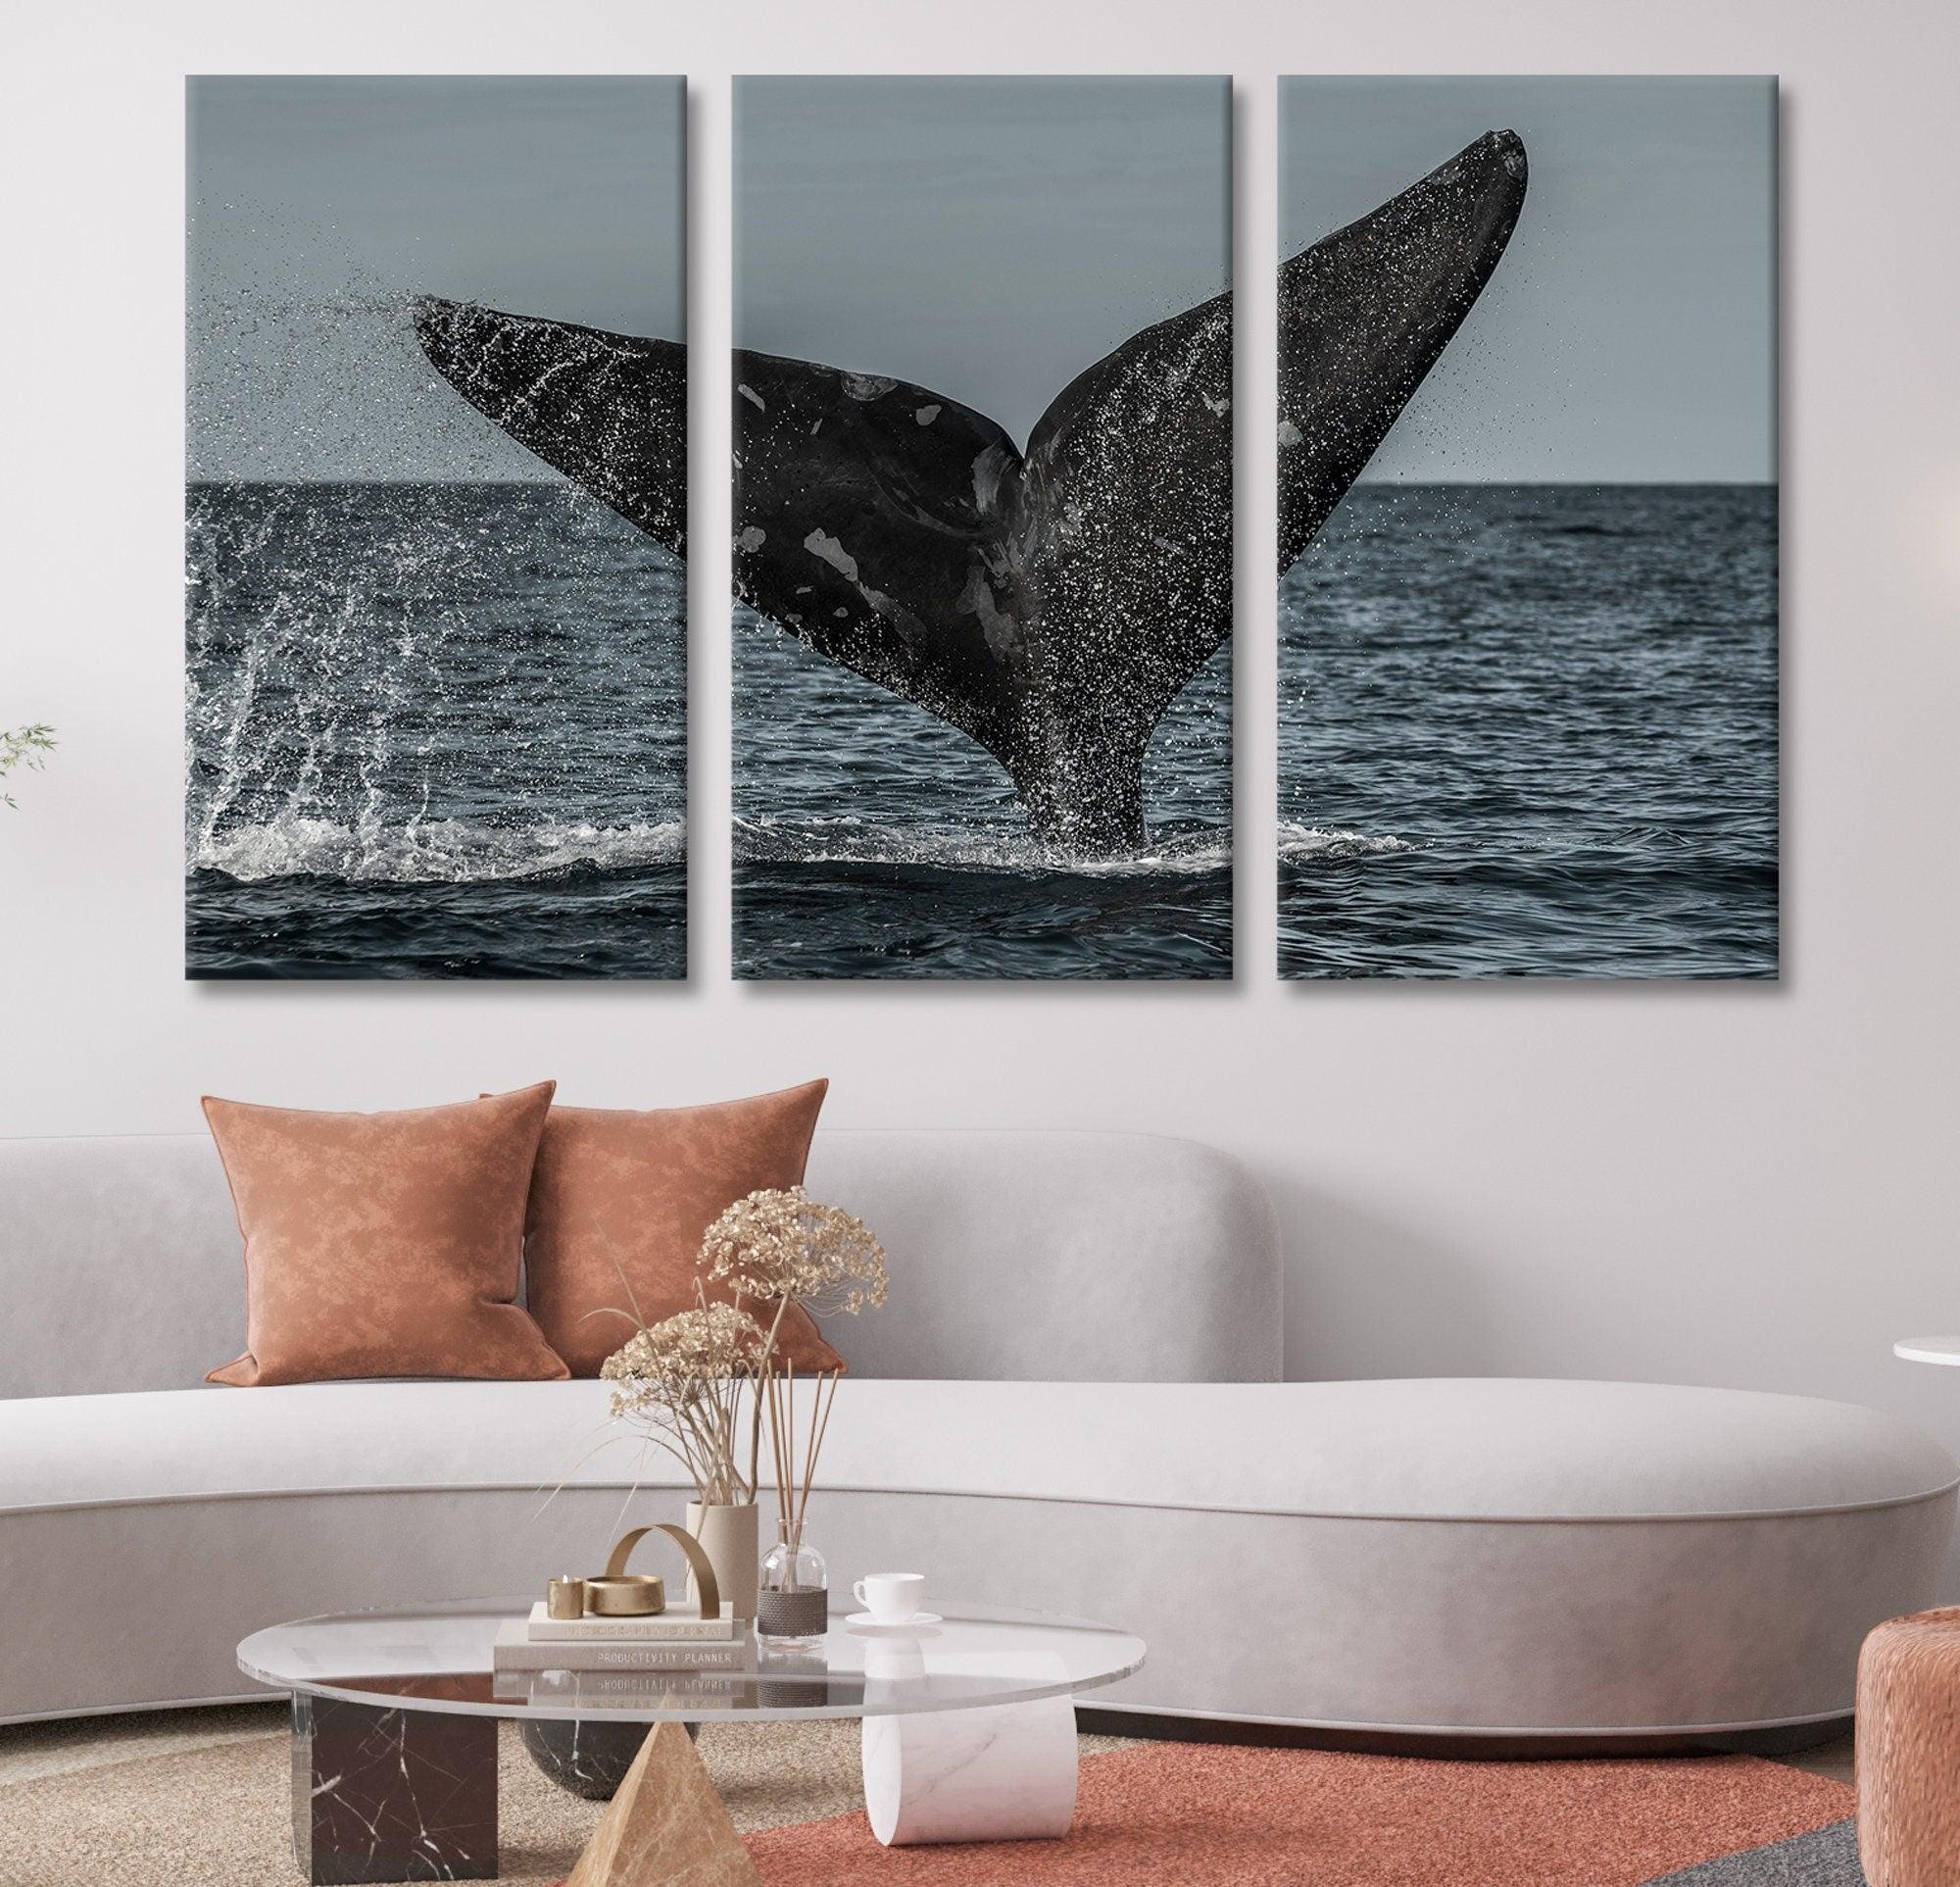 Whale Tail Stylish Wall Decor| Whale Large Wall Pictures, Whale Printing Art, Whale Canvas Wall Decor, Underwater Life Home Decor Wall